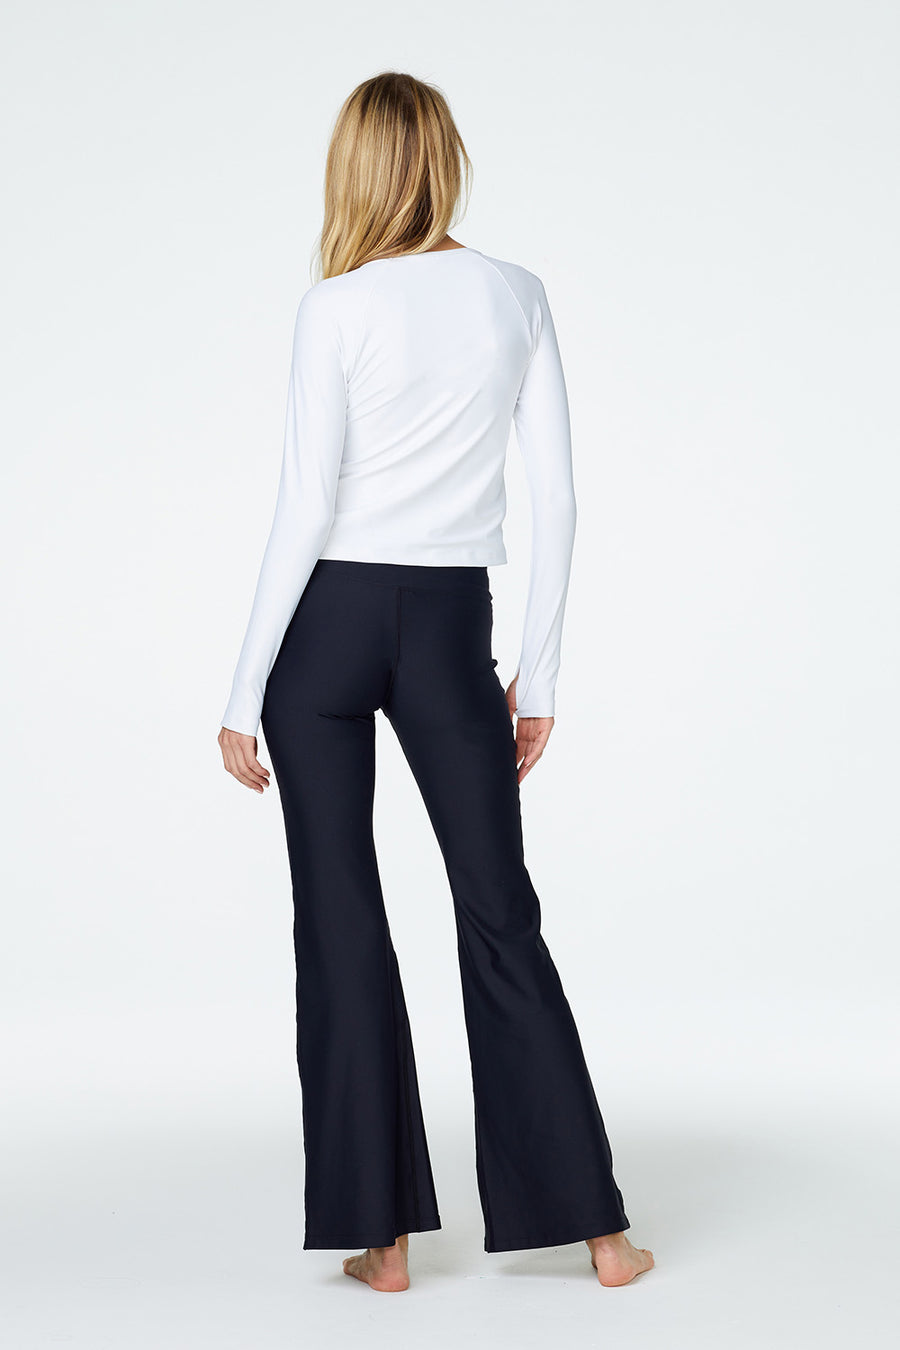 Juliette Palazzo Pant in Black Back